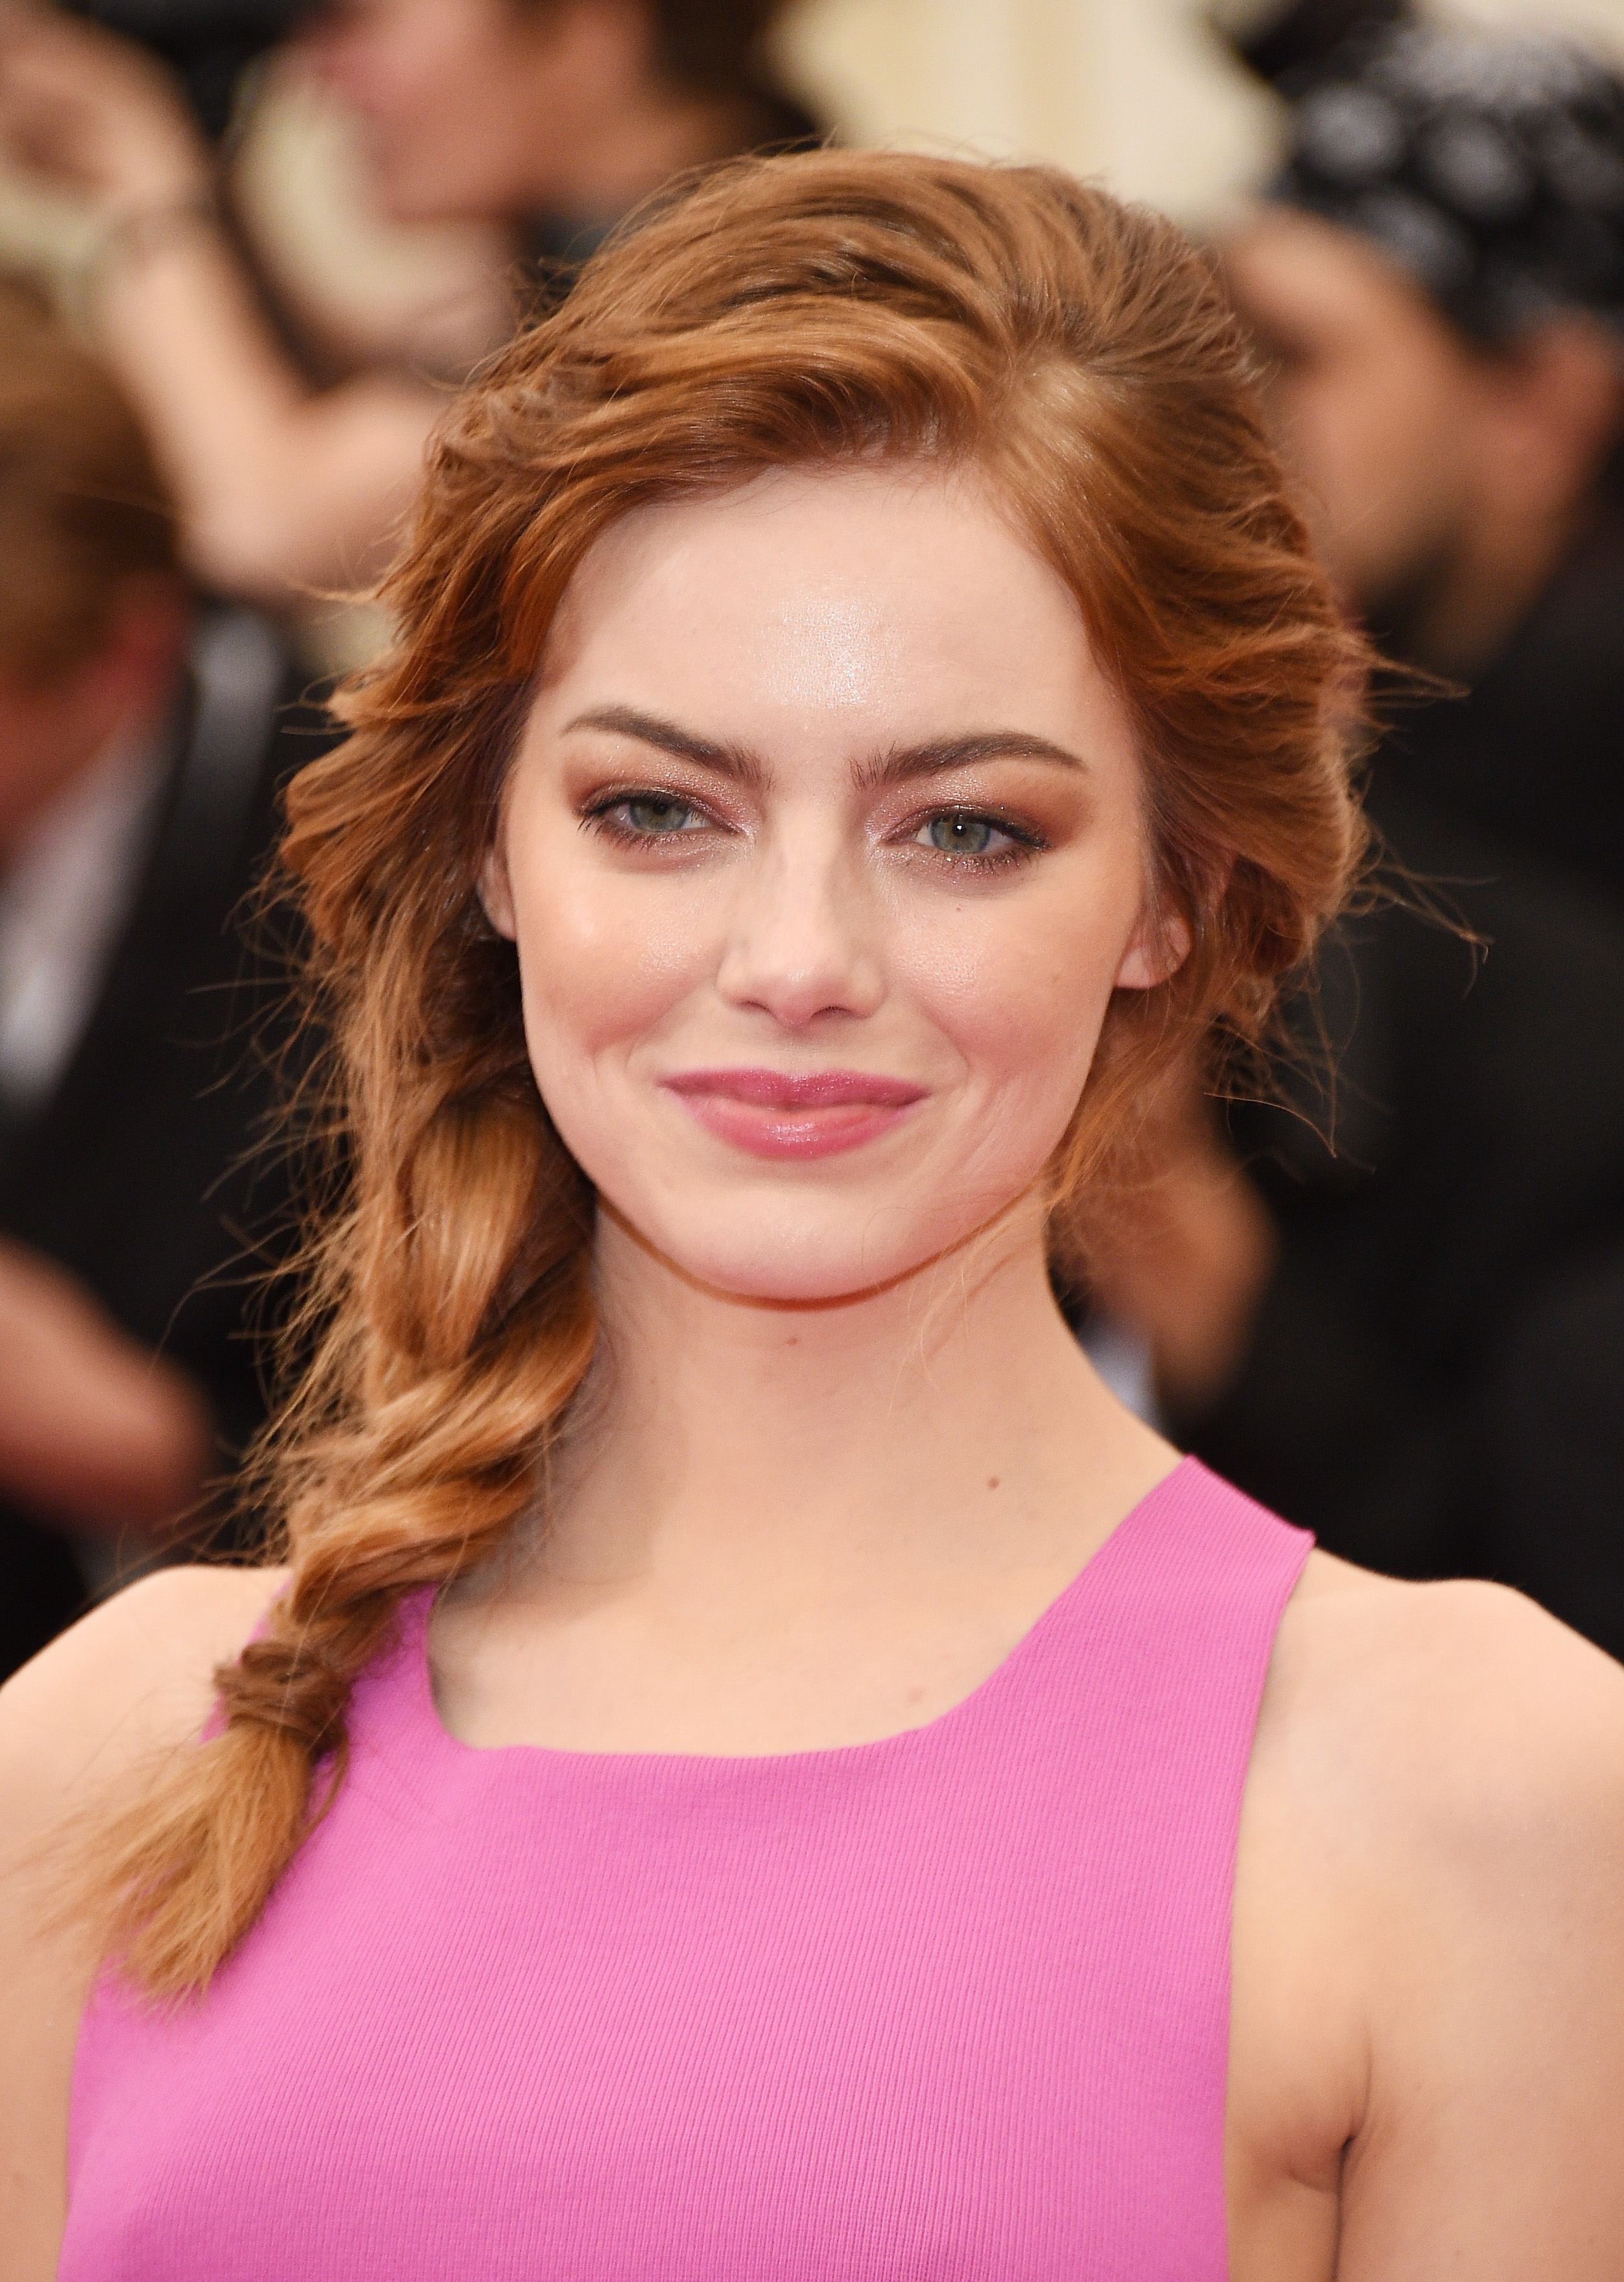 Emma Stone attends the "Charles James: Beyond Fashion" Costume Institute Gala at the Metropolitan Museum of Art on May 5, 2014 in New York City. (Larry Busacca--Getty Images)